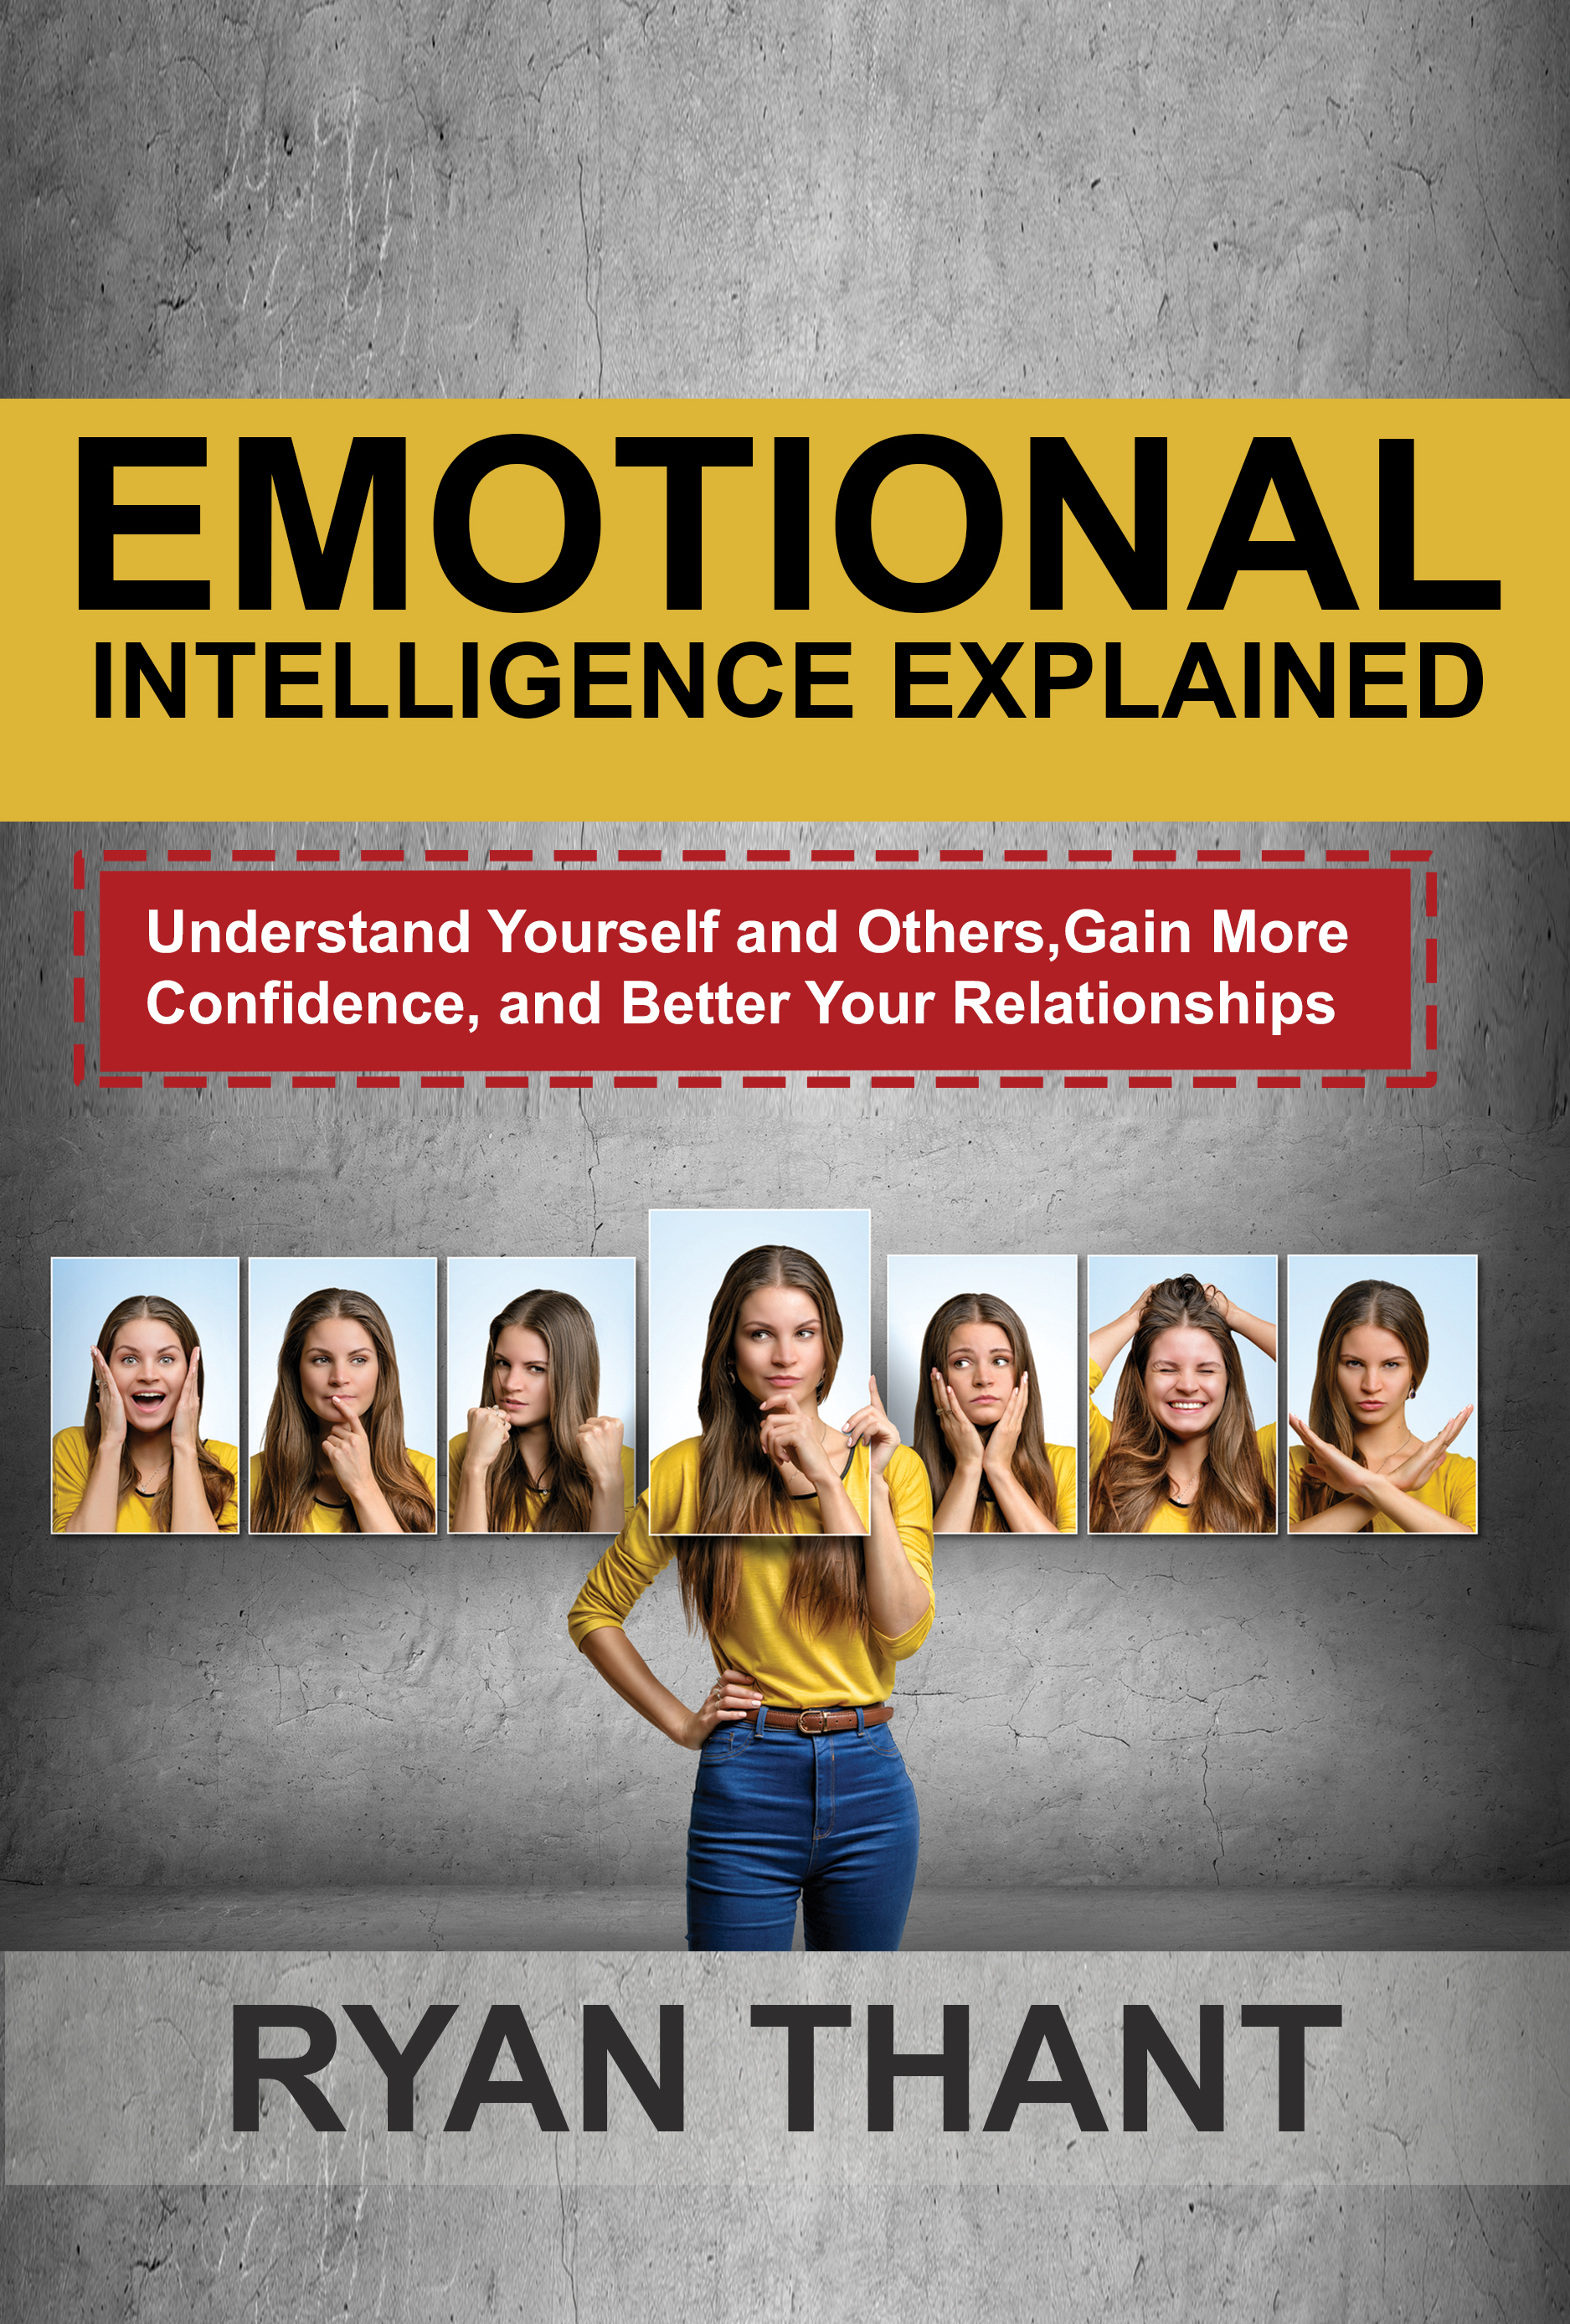 FREE: Emotional Intelligence Explained: Understand Yourself and Others, Gain More Confidence, and Better Your Relationships by Ryan Thant